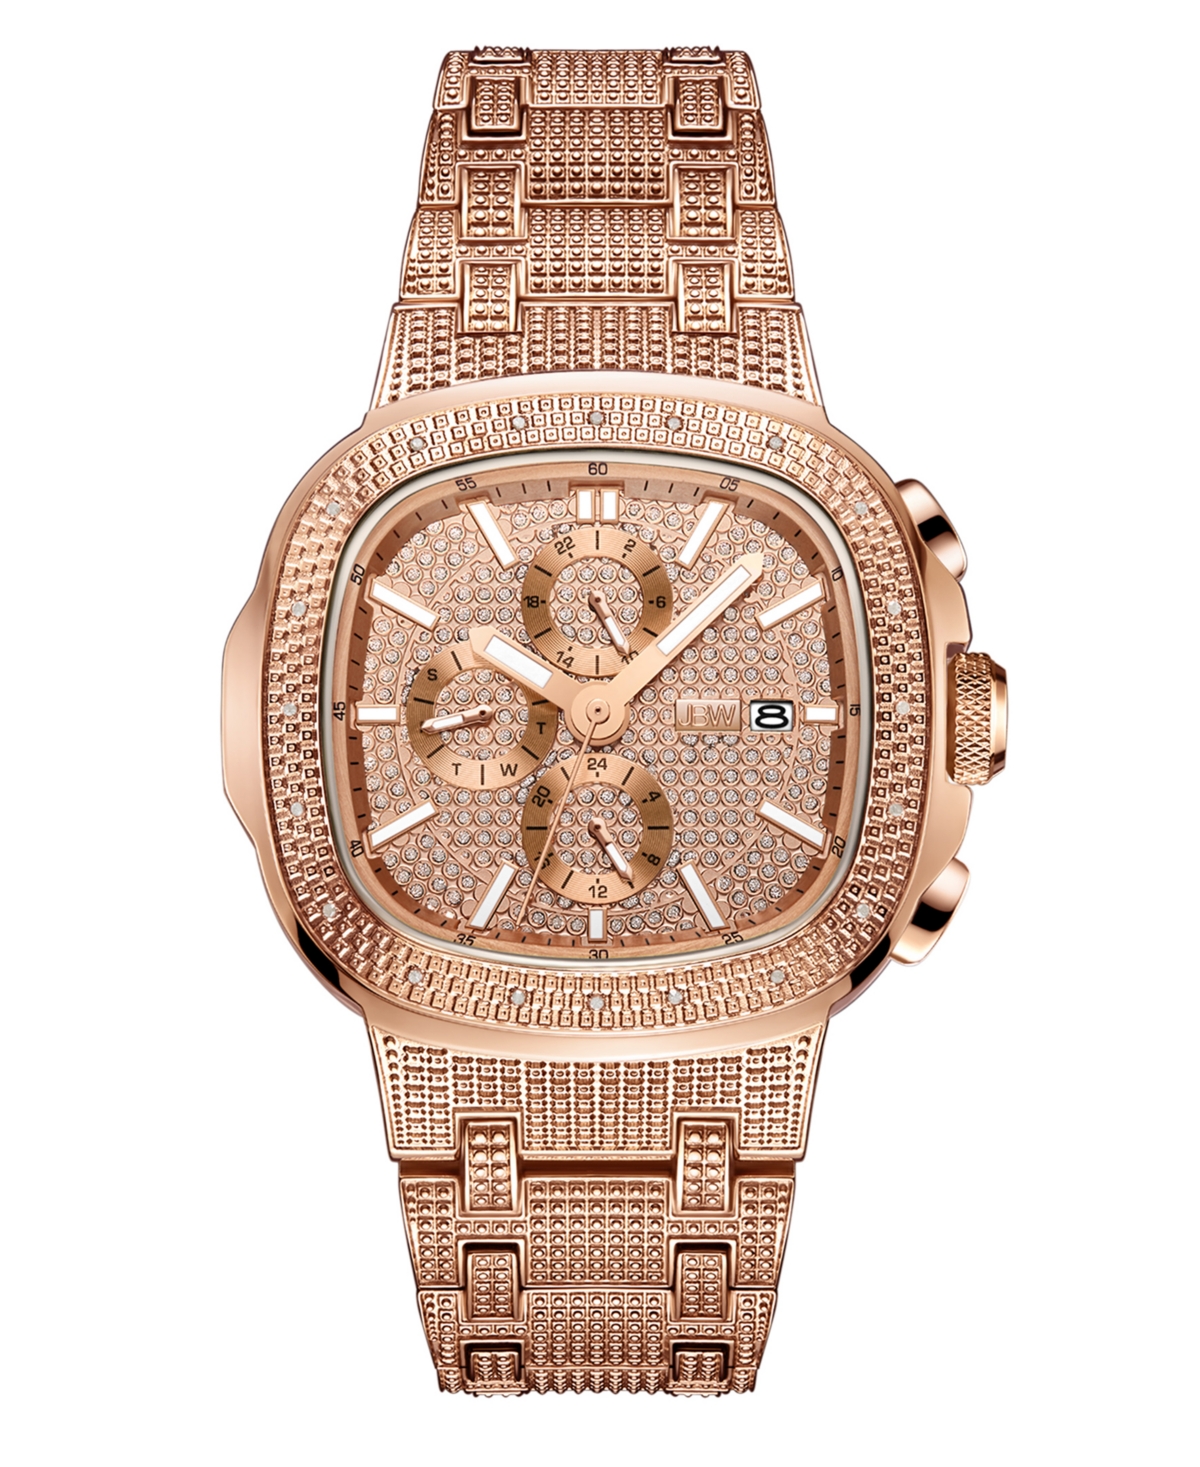 Men's Diamond (1/5 ct. t.w.) Watch in 18k Rose Gold-plated Stainless-steel Watch 48mm - Gold